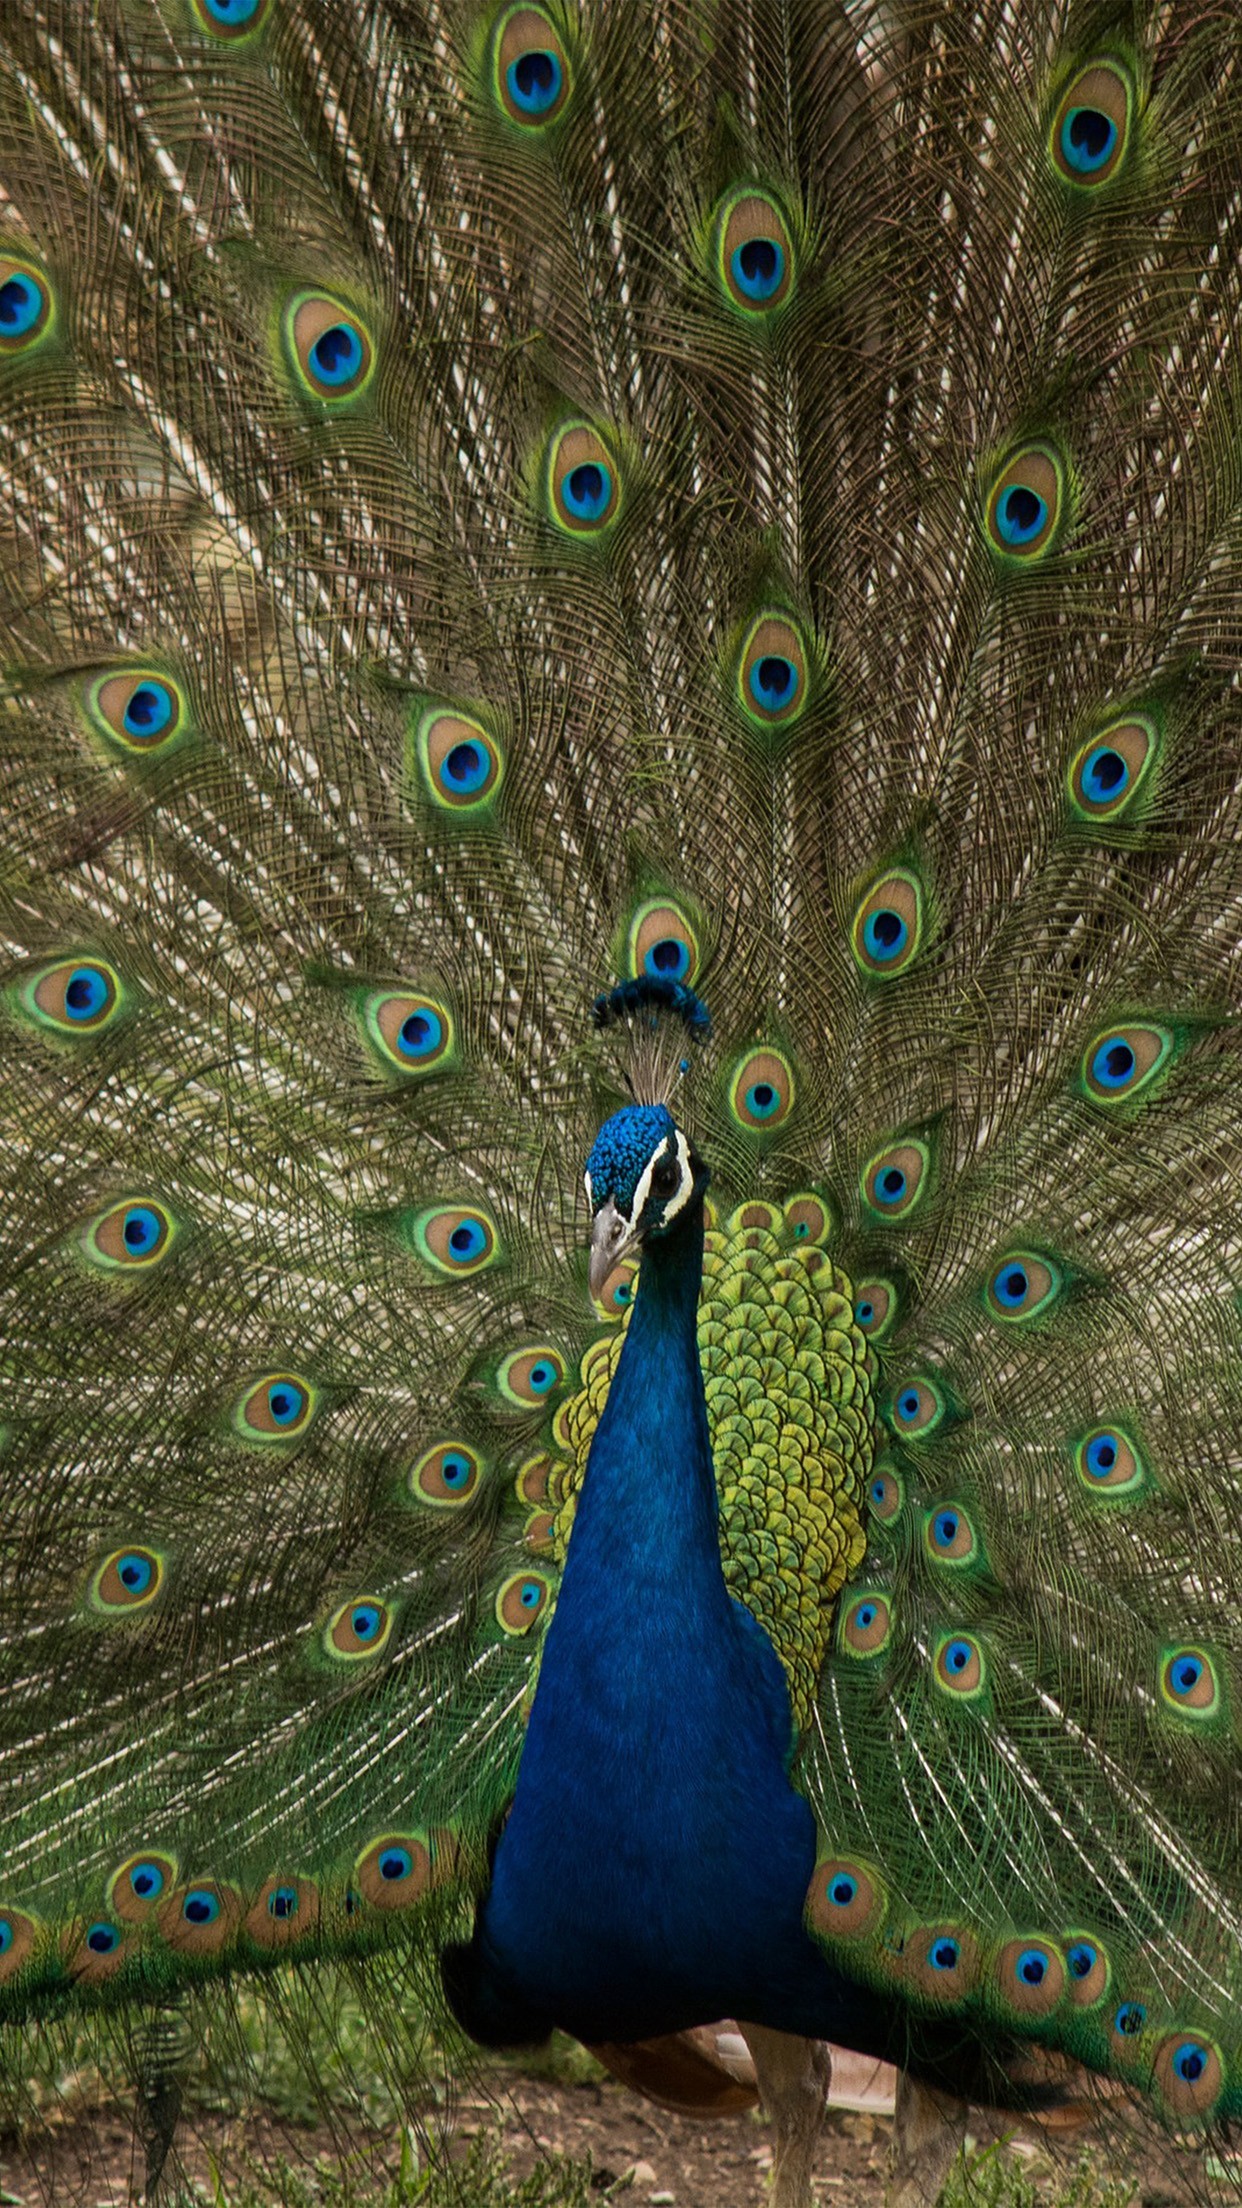 Peacock Wallpaper Android